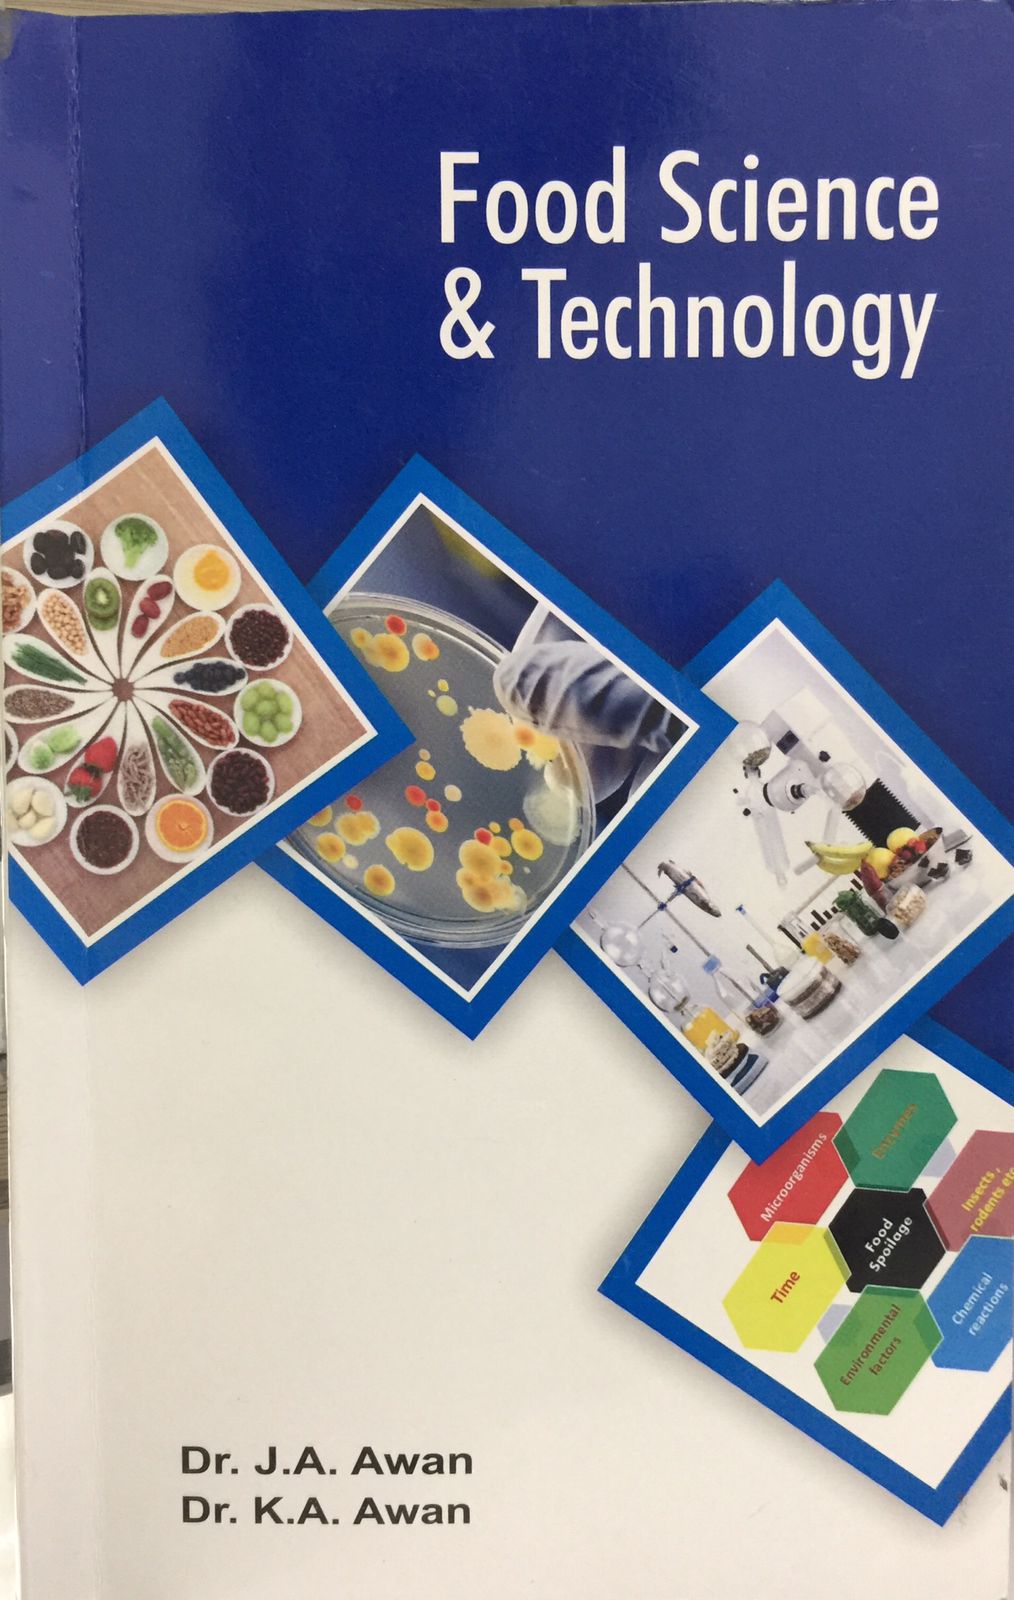 Foodscience and technology